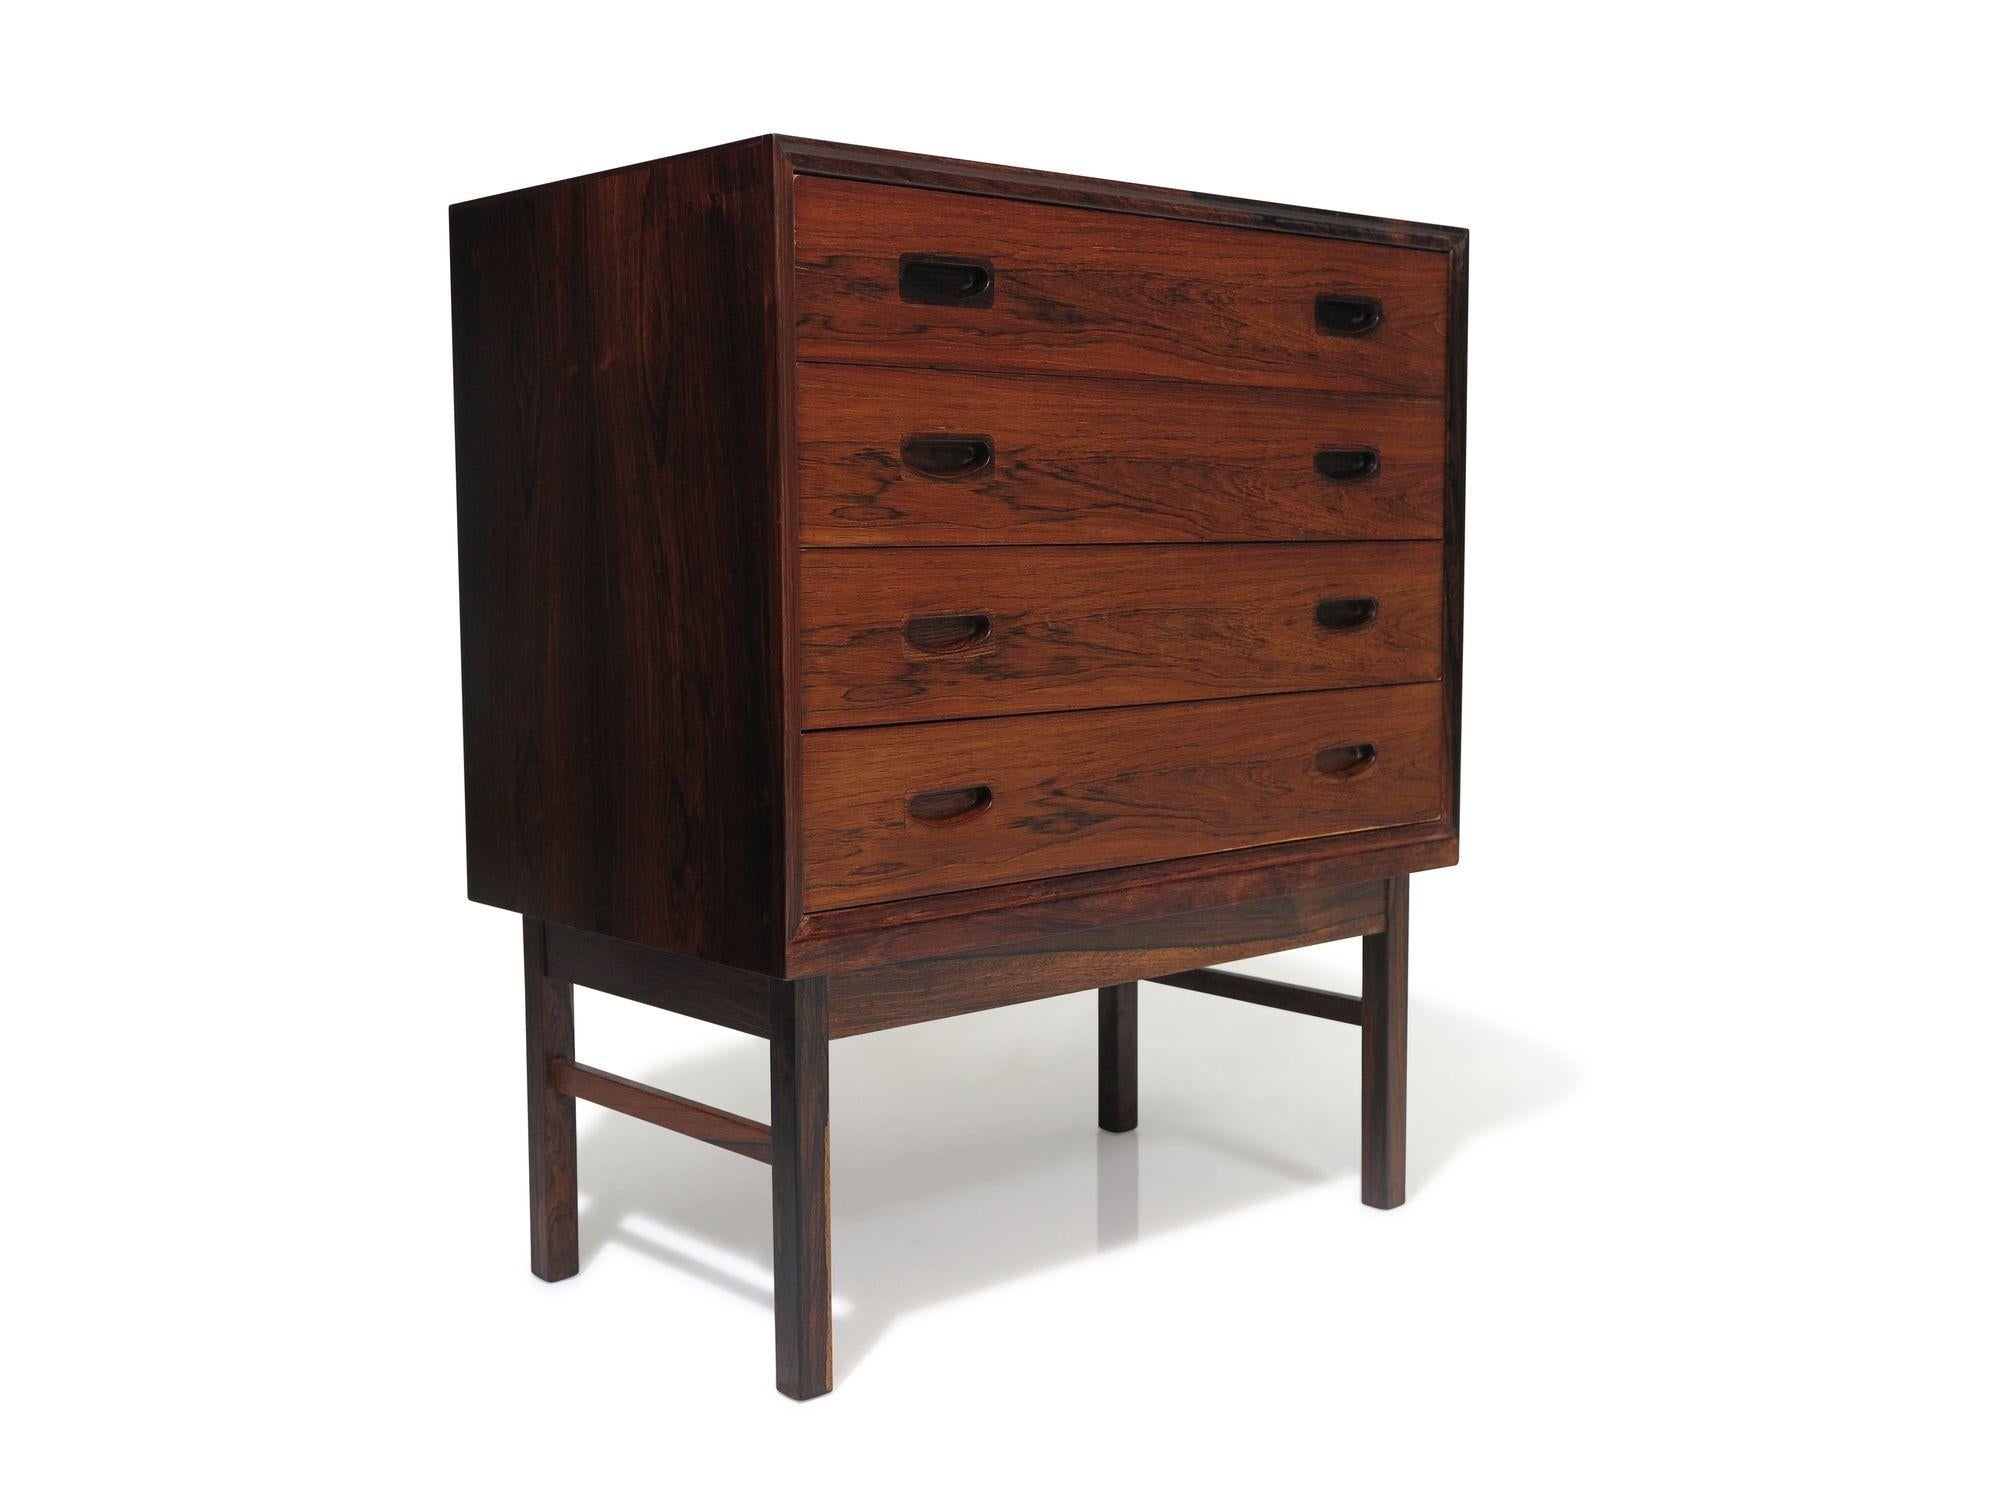 High-quality Danish chest of drawers attributed to Kofoed Larsen, crafted of Brazilian rosewood with four book-matched drawers featuring recessed handles, raised on solid rosewood legs. Minimalist design with charming details, this flexible piece